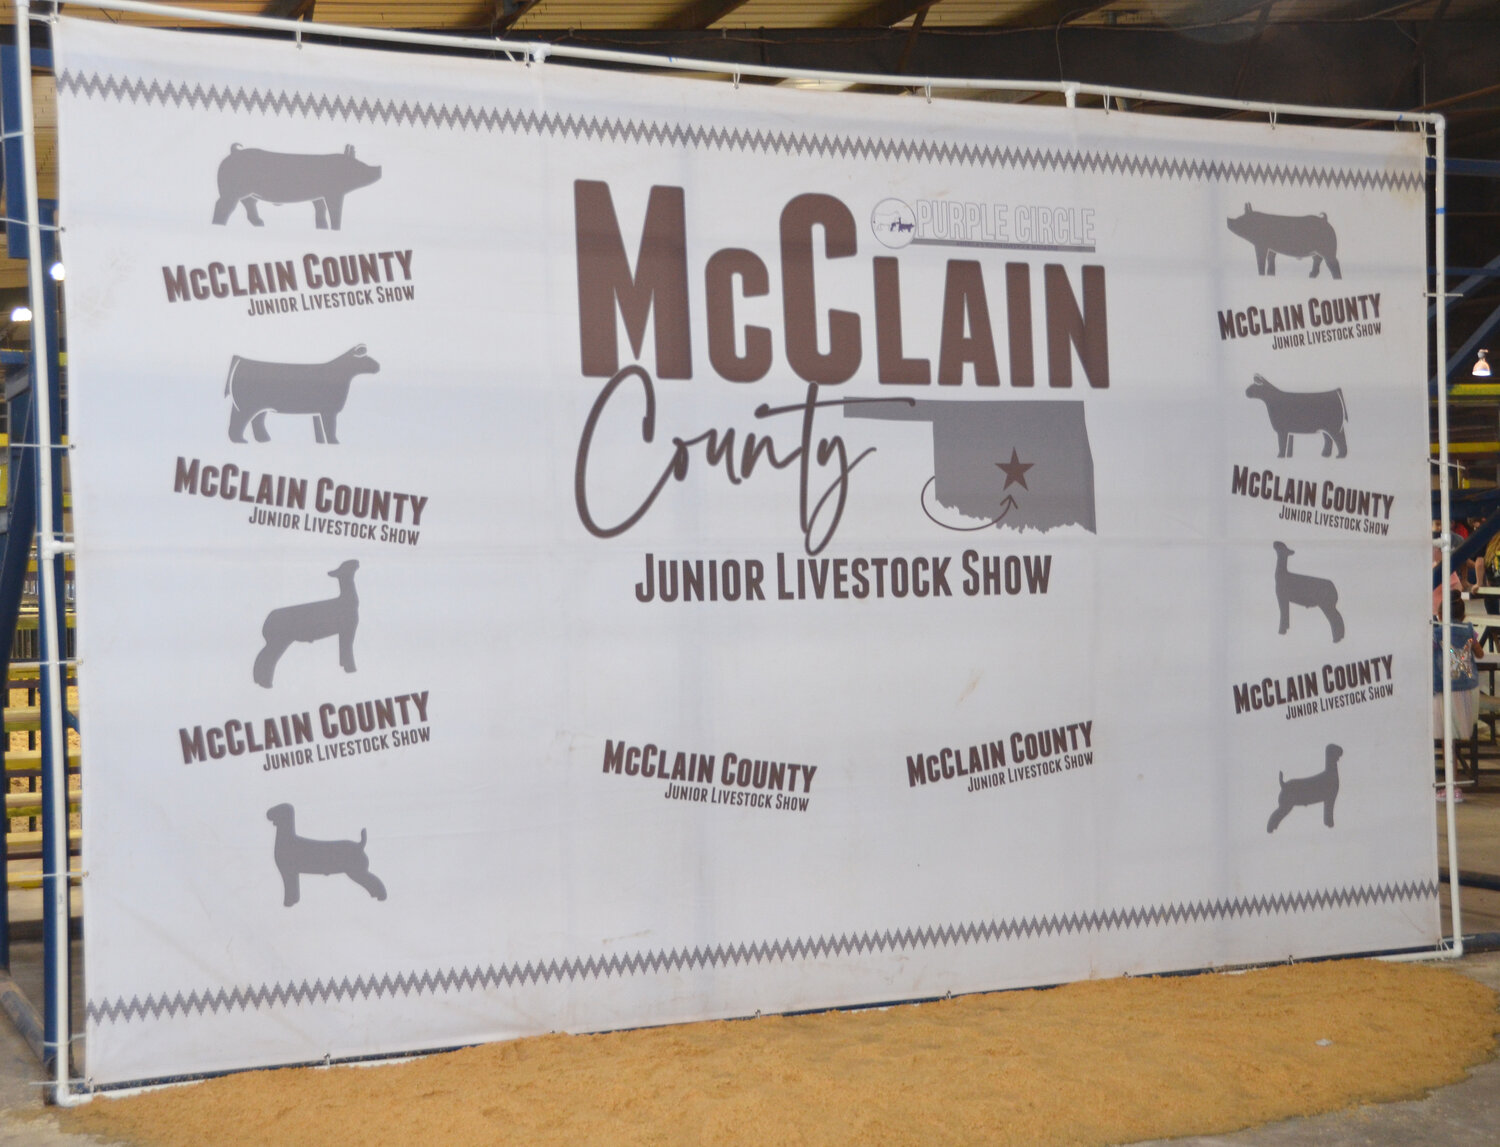 The banner at the county fair pretty well summed up the junior livestock portion of the annual McClain County Free Fair.